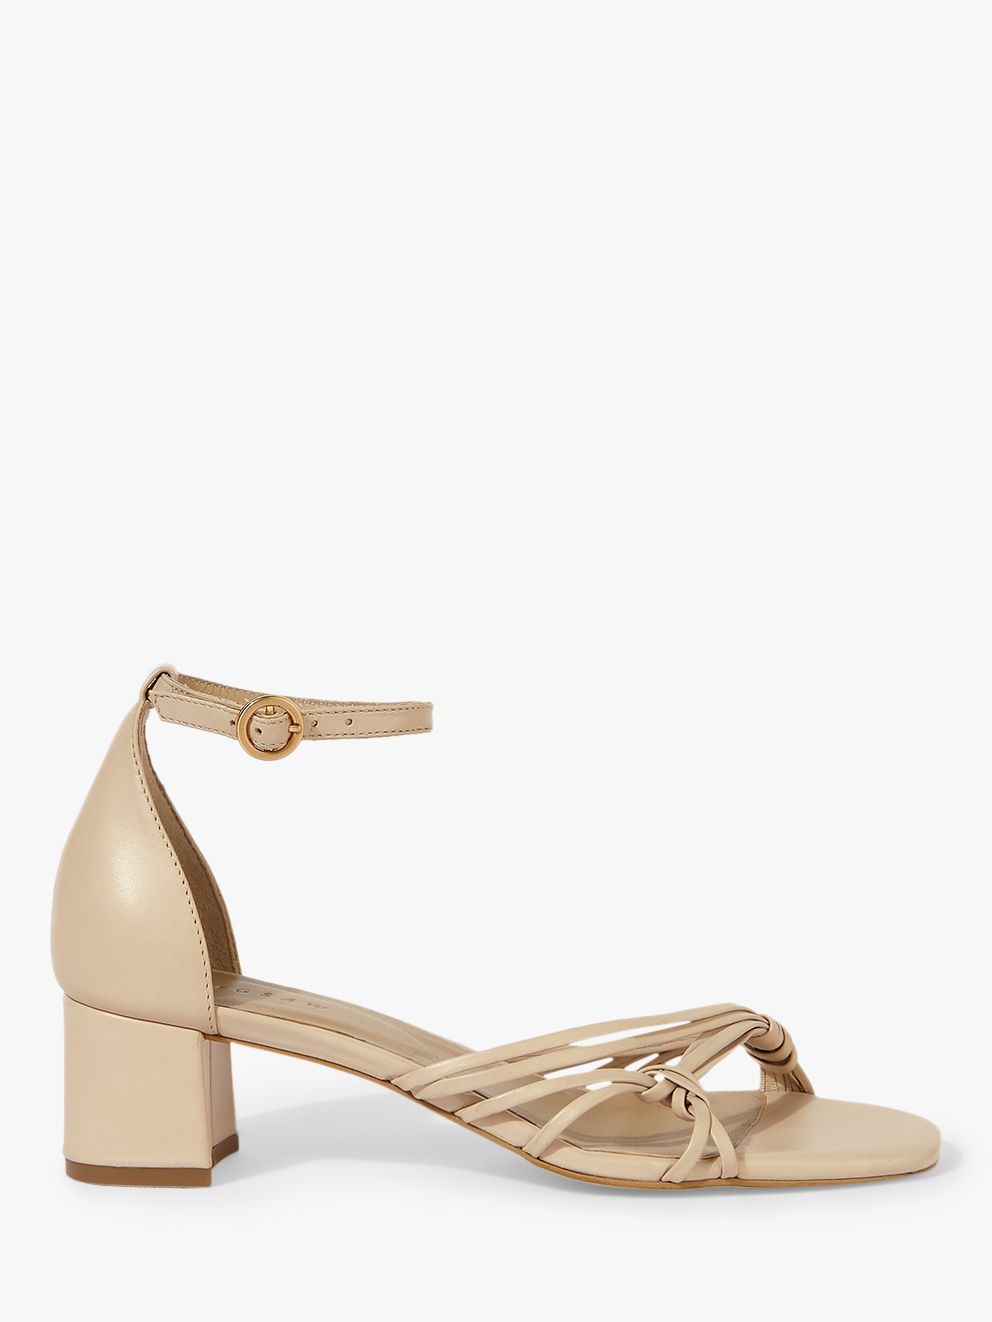 nude strappy sandals low heel